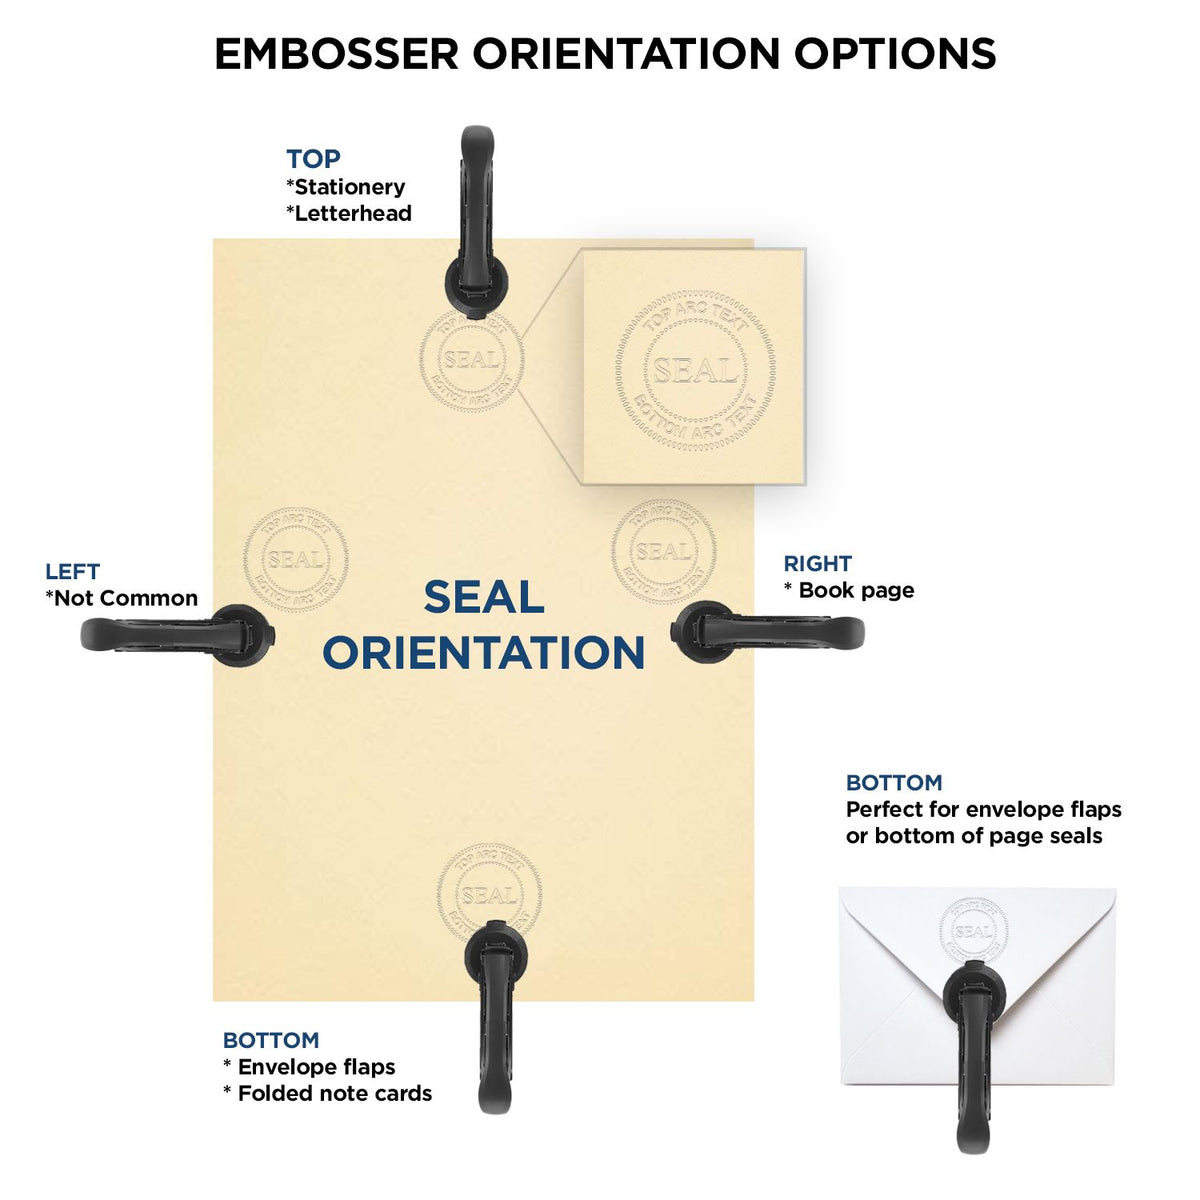 An infographic for the State of South Dakota Long Reach Architectural Embossing Seal showing embosser orientation, this is showing examples of a top, bottom, right and left insert.